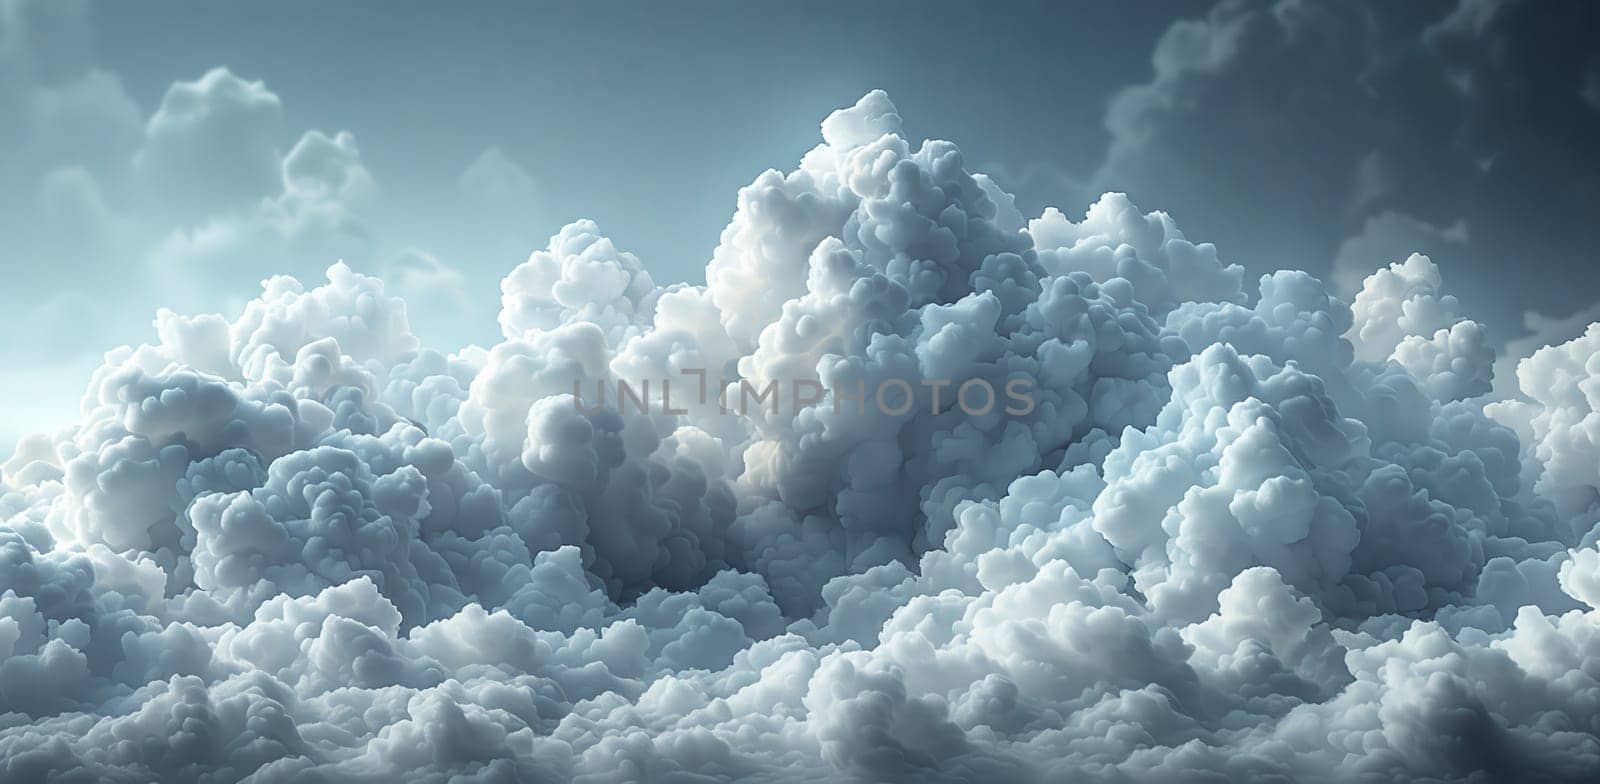 Cloudy sky filled with cumulus clouds, creating a dramatic natural landscape by richwolf